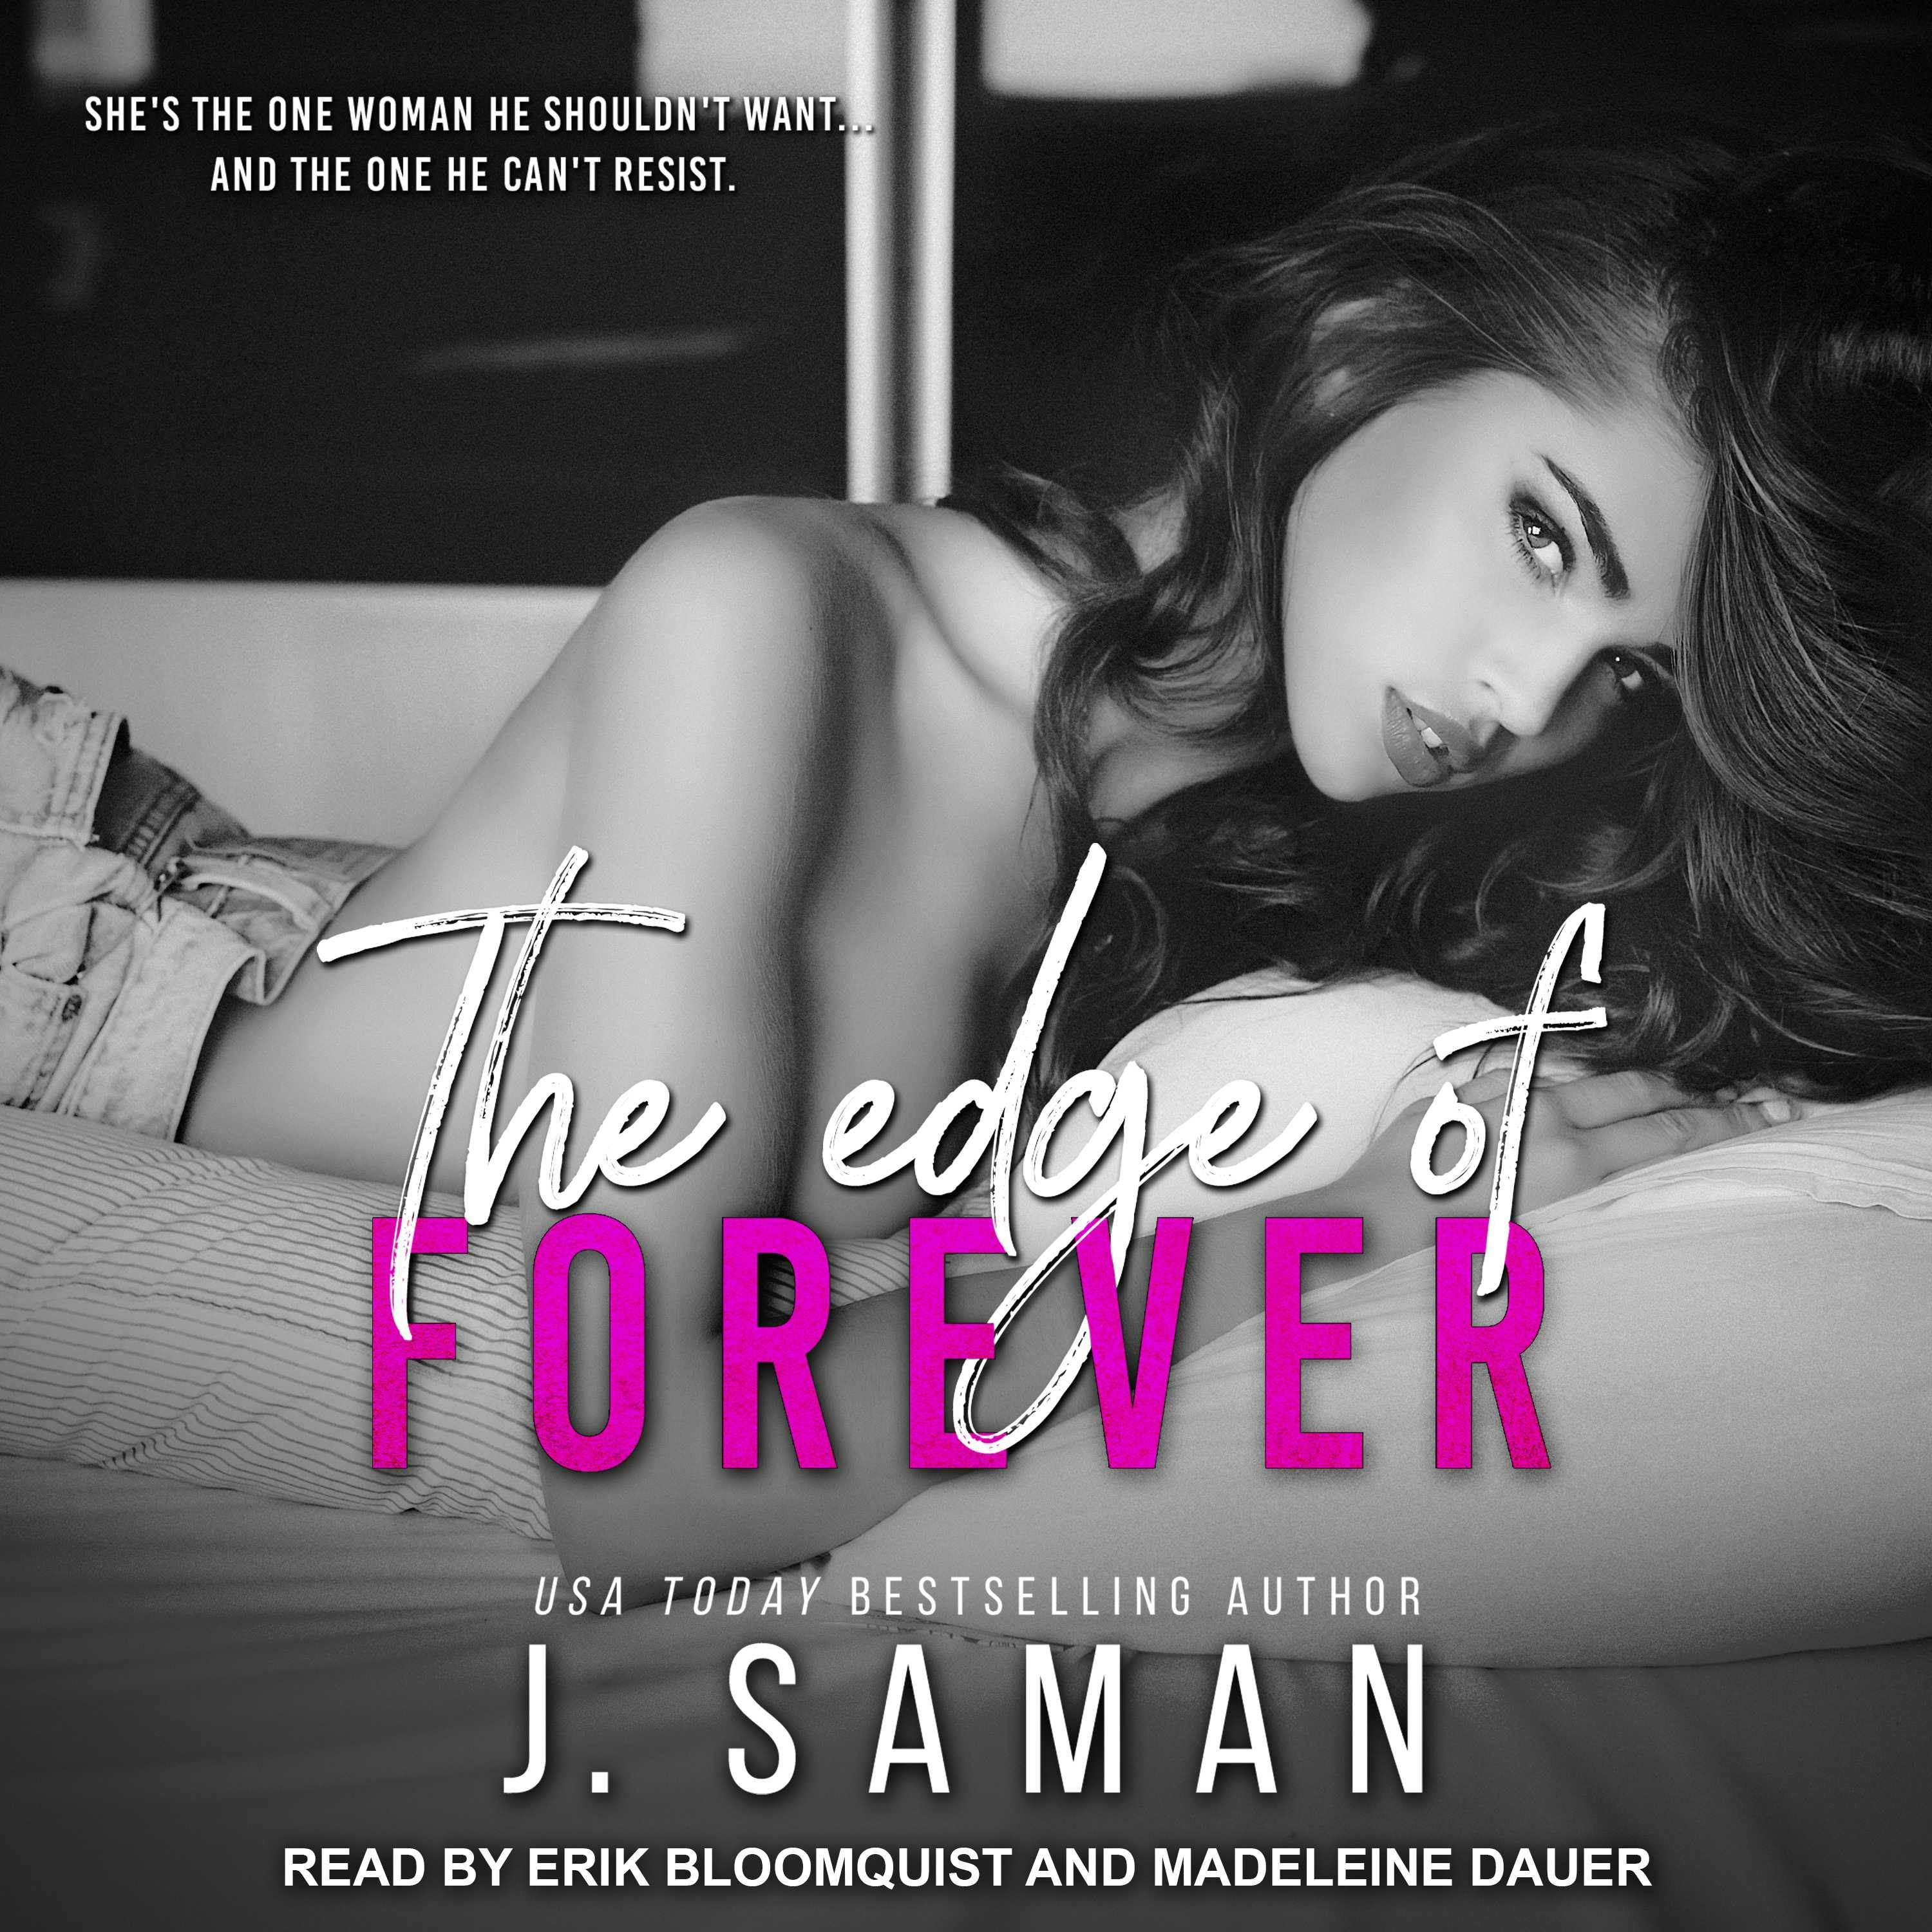 The Edge of Forever: She's The One Woman He Shouldn't Want... And The One He Can't Resist. - J. Saman